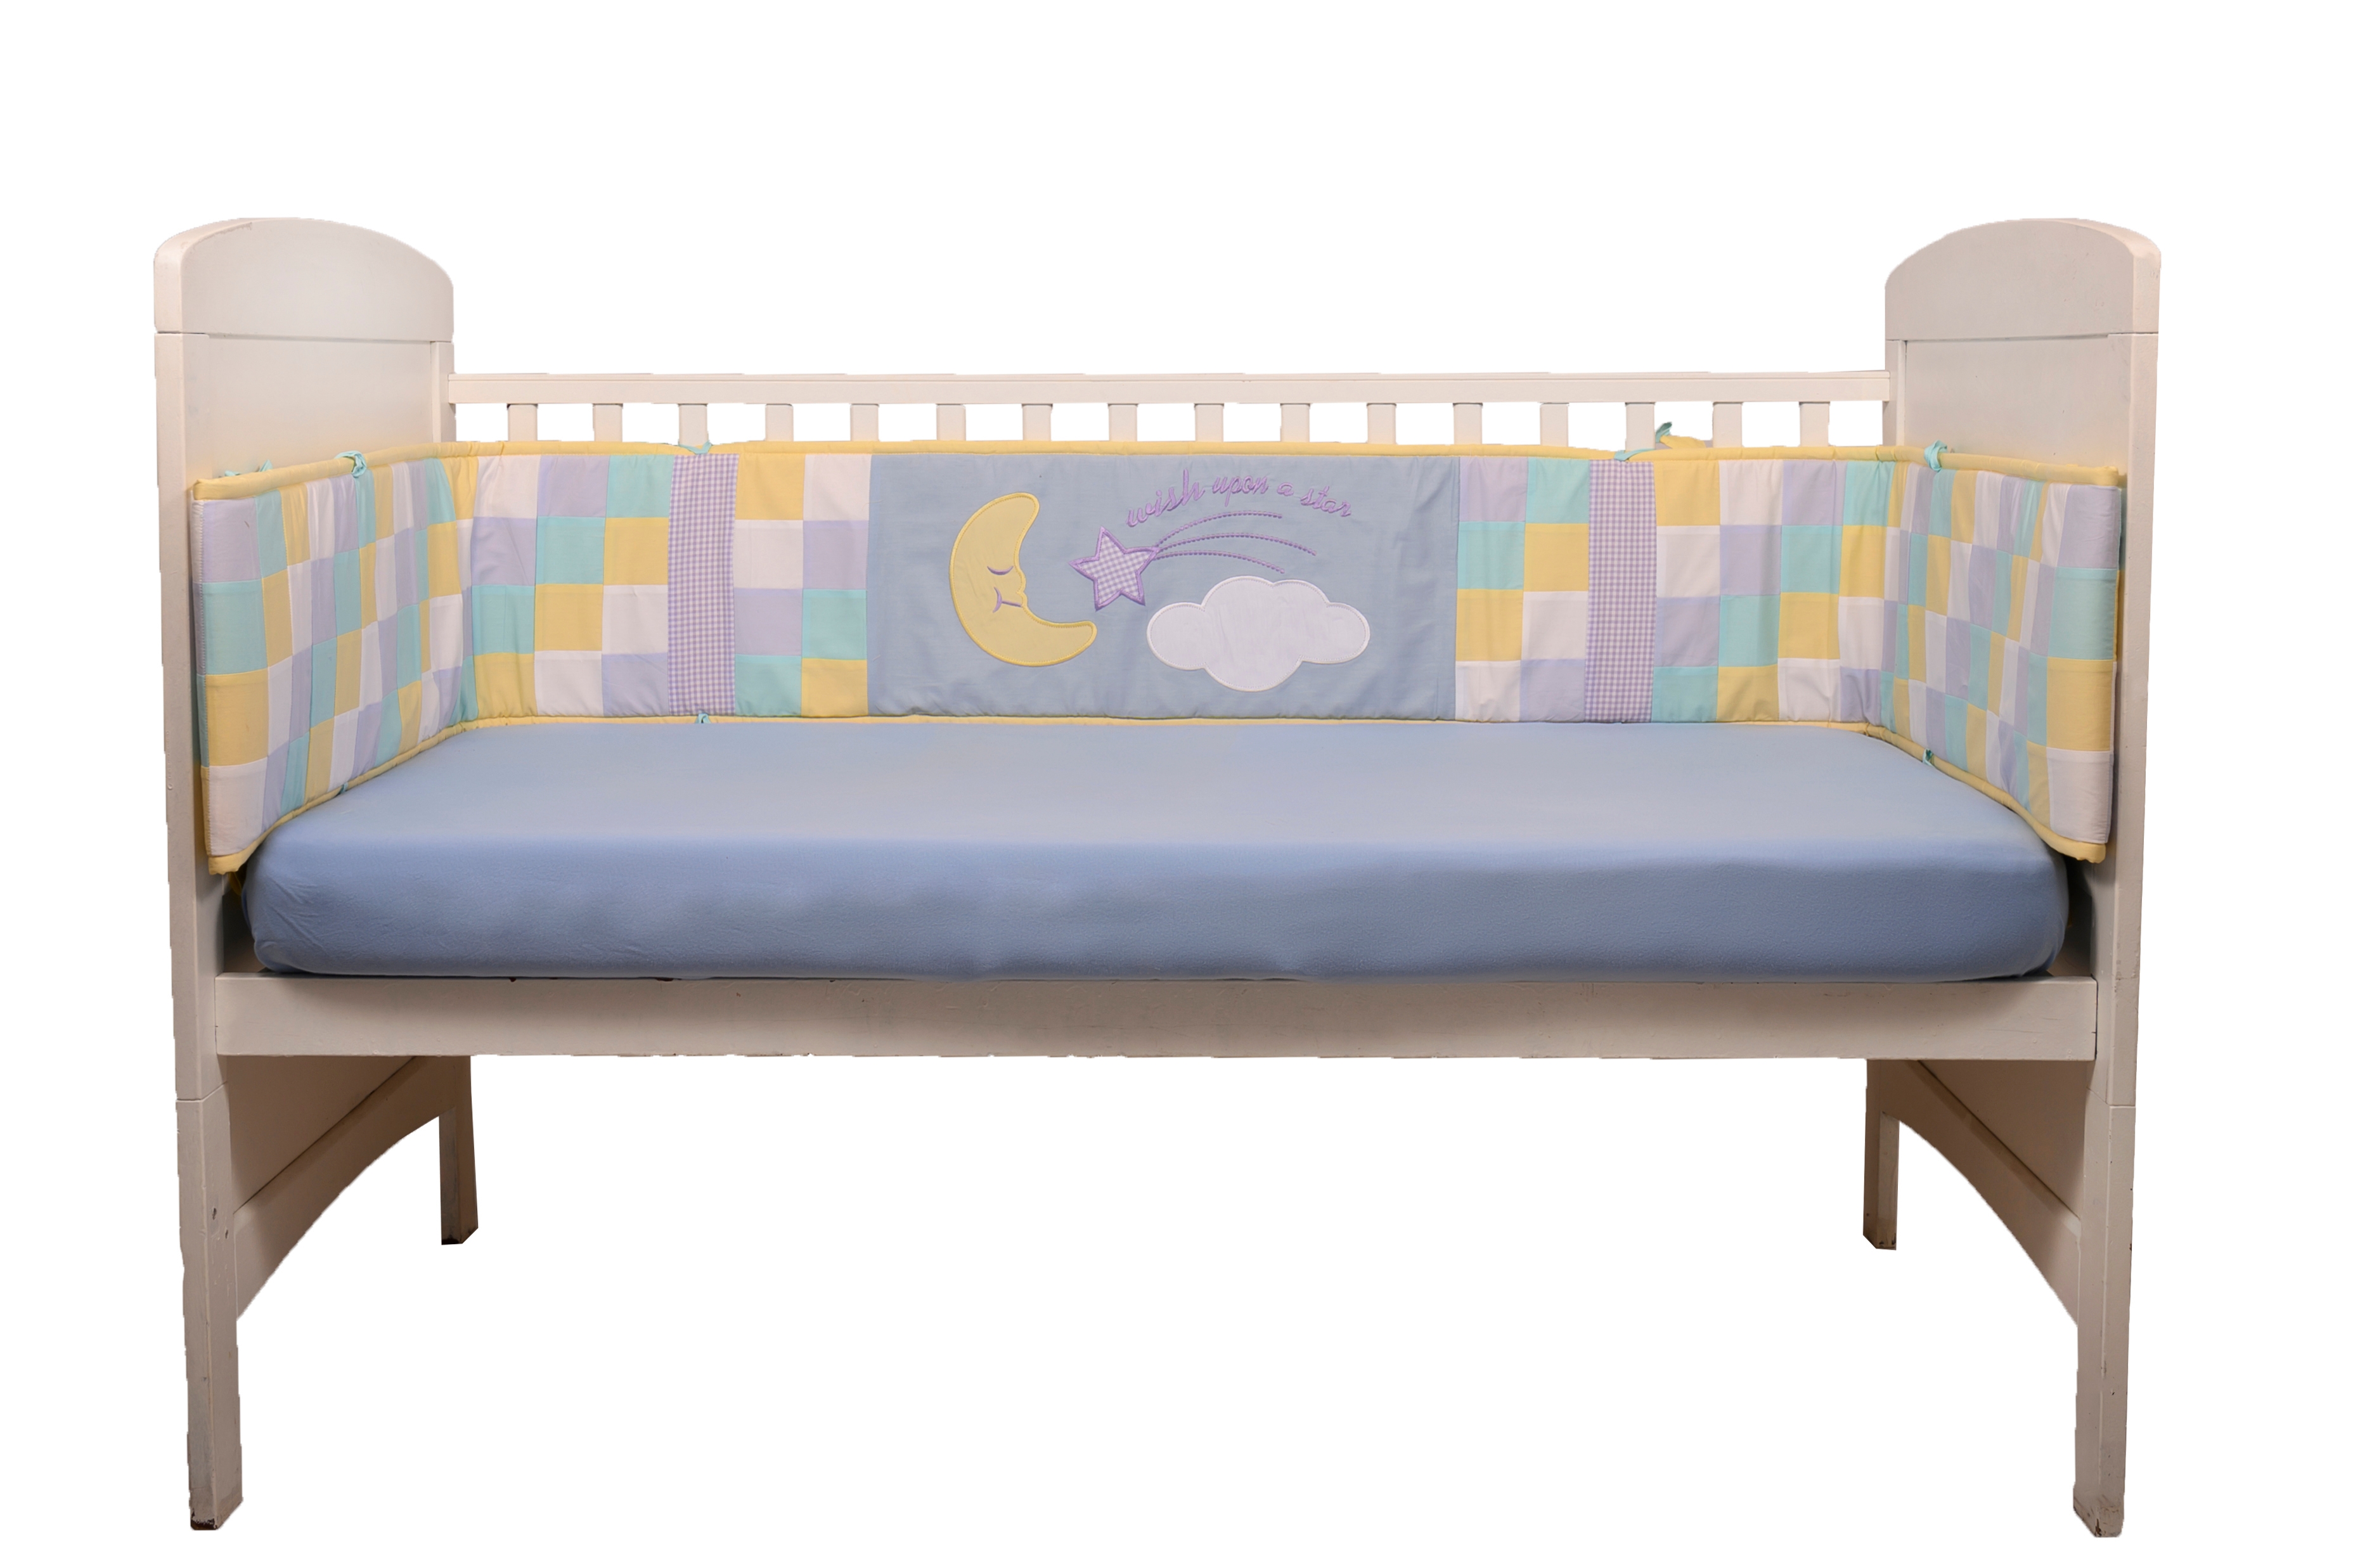 Blooming Buds | Blooming Buds Sweet Lullaby Full Cot Bumper - Light Blue & Yellow